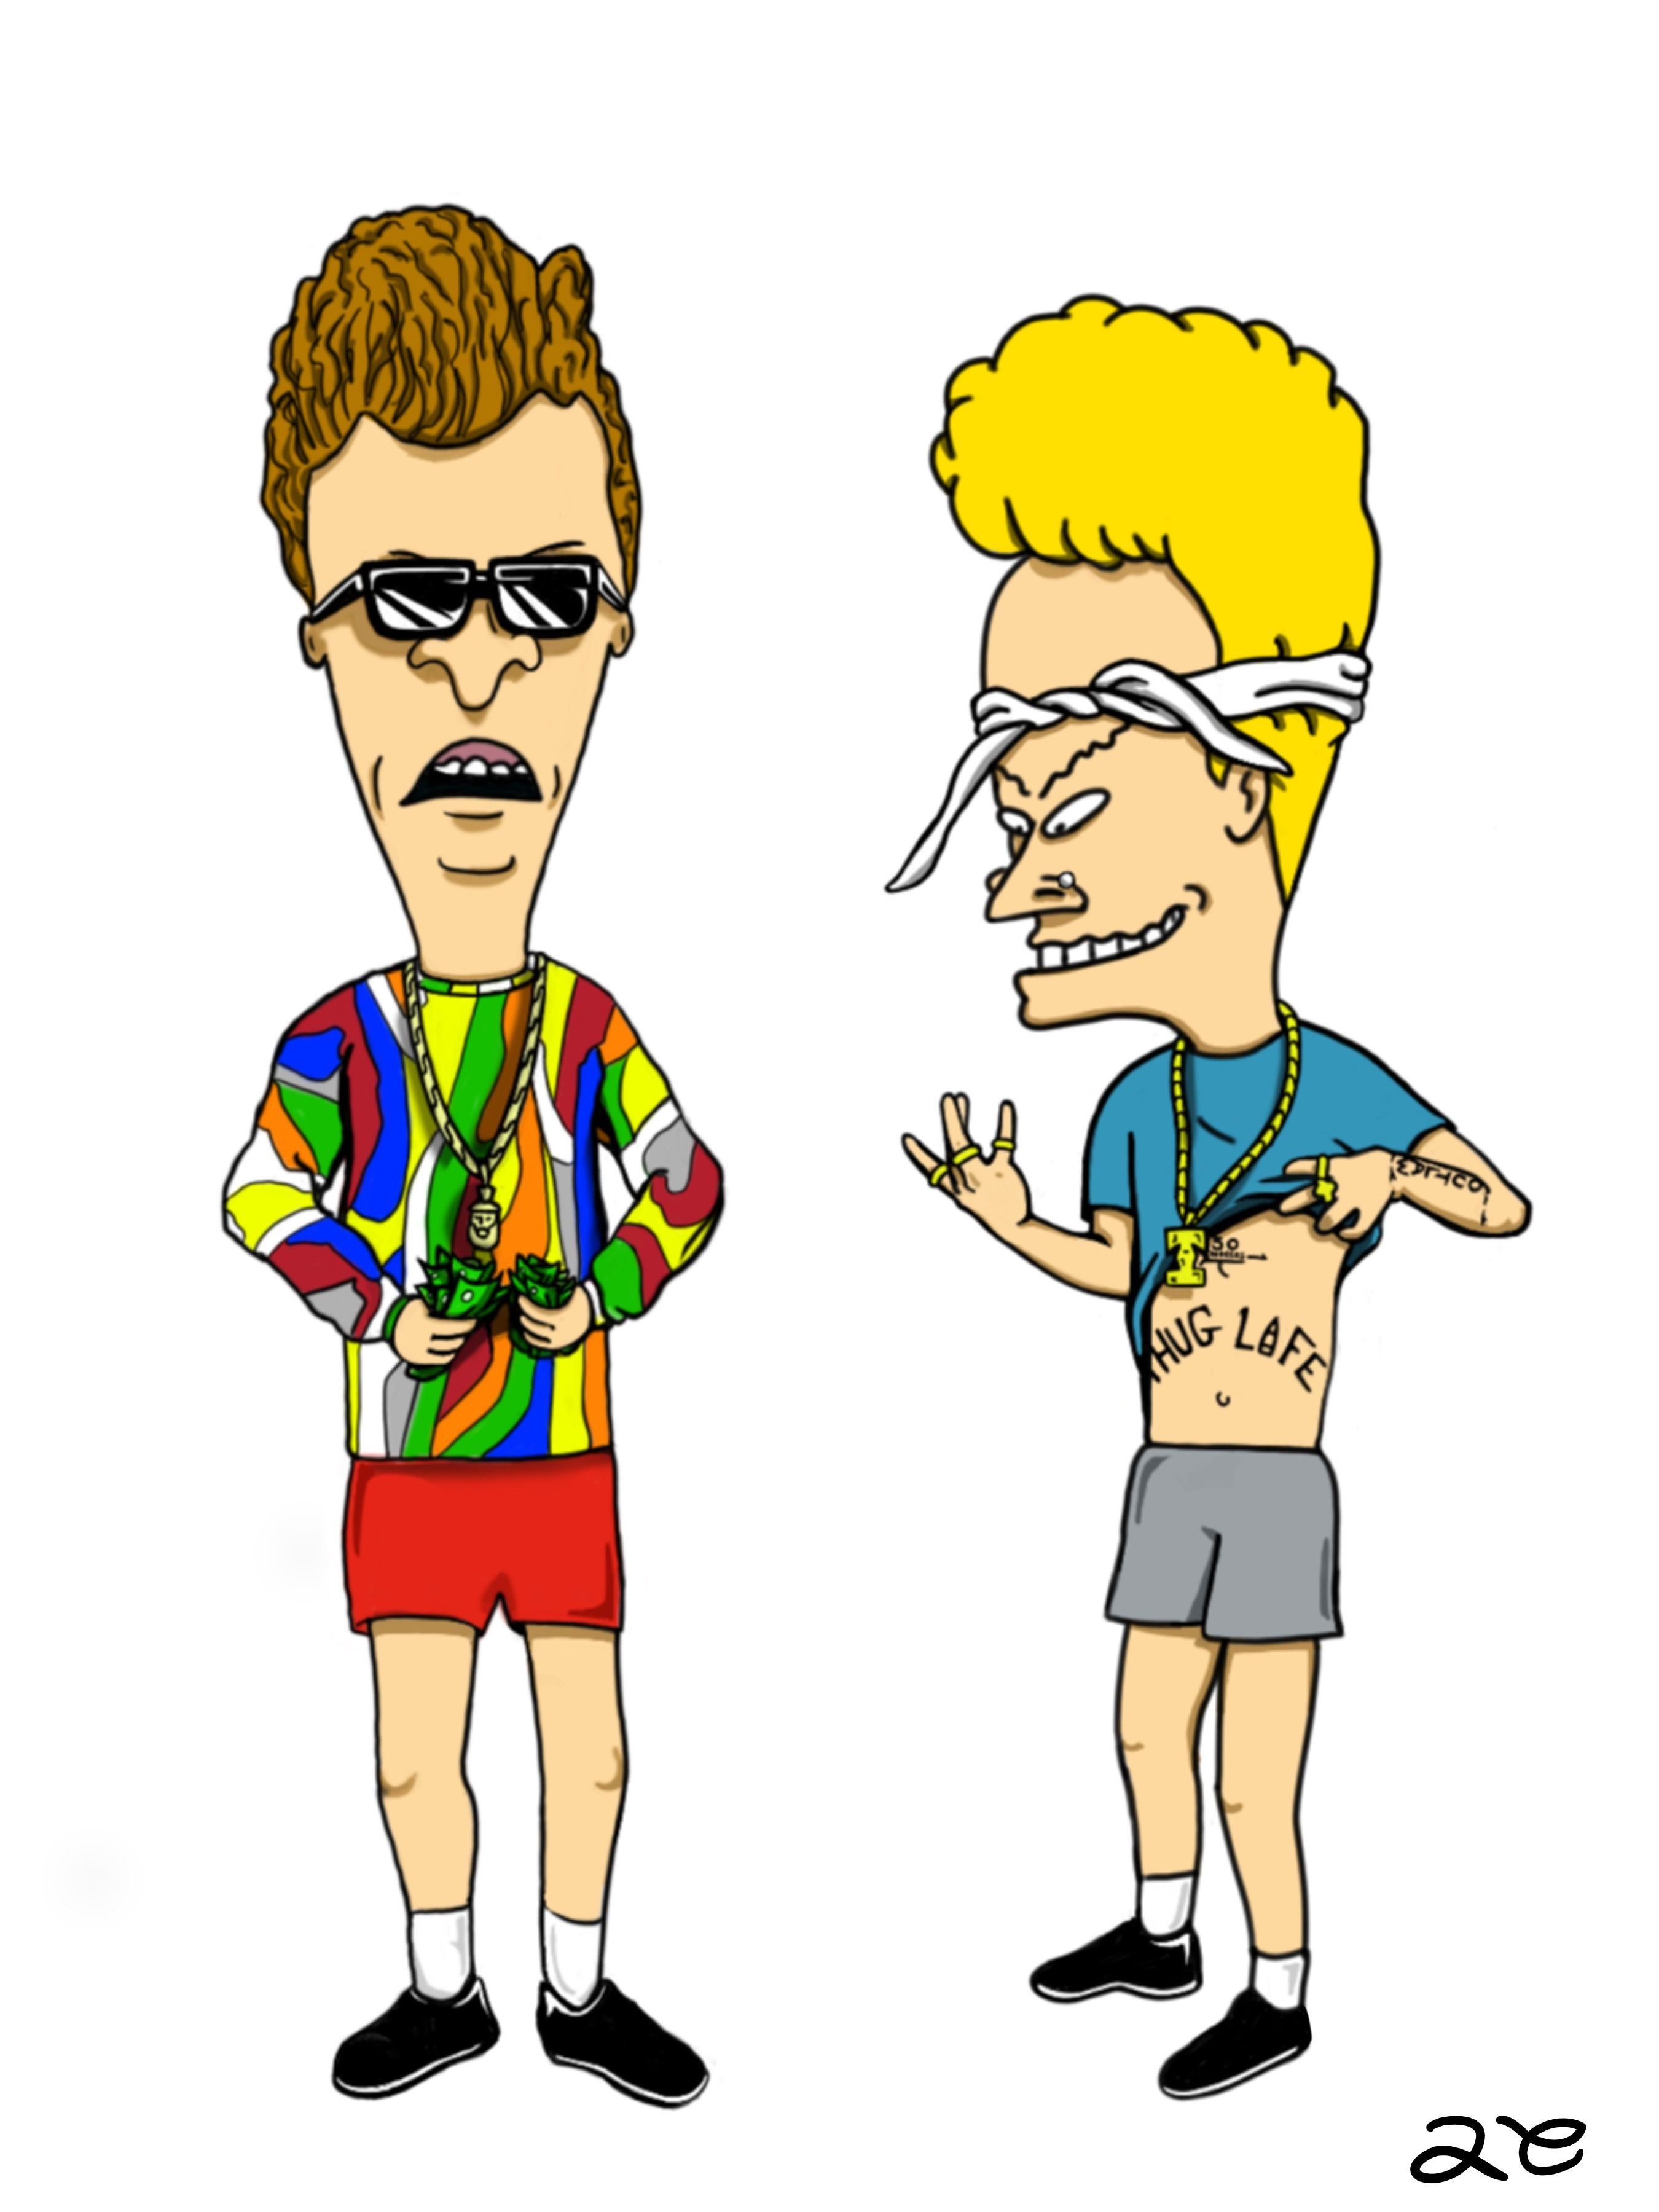 download beavis and butthead 123movies